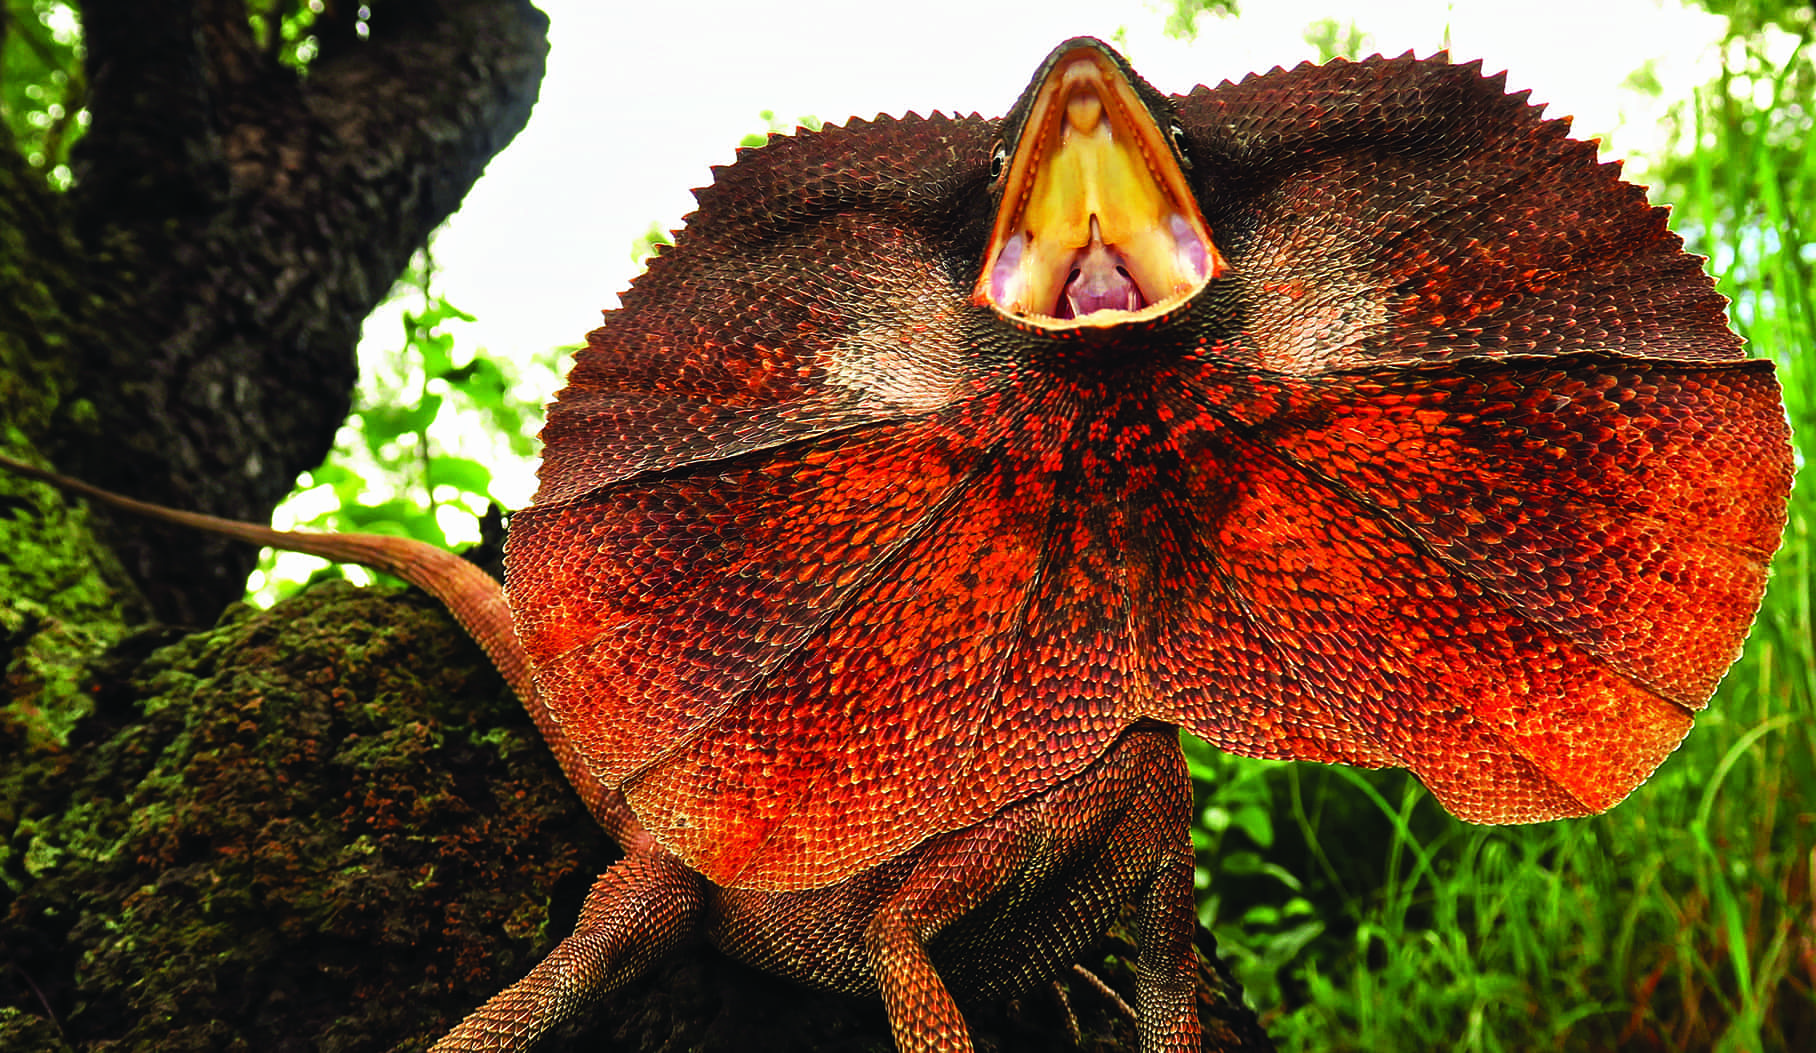 The science behind the frill of the frillneck lizard